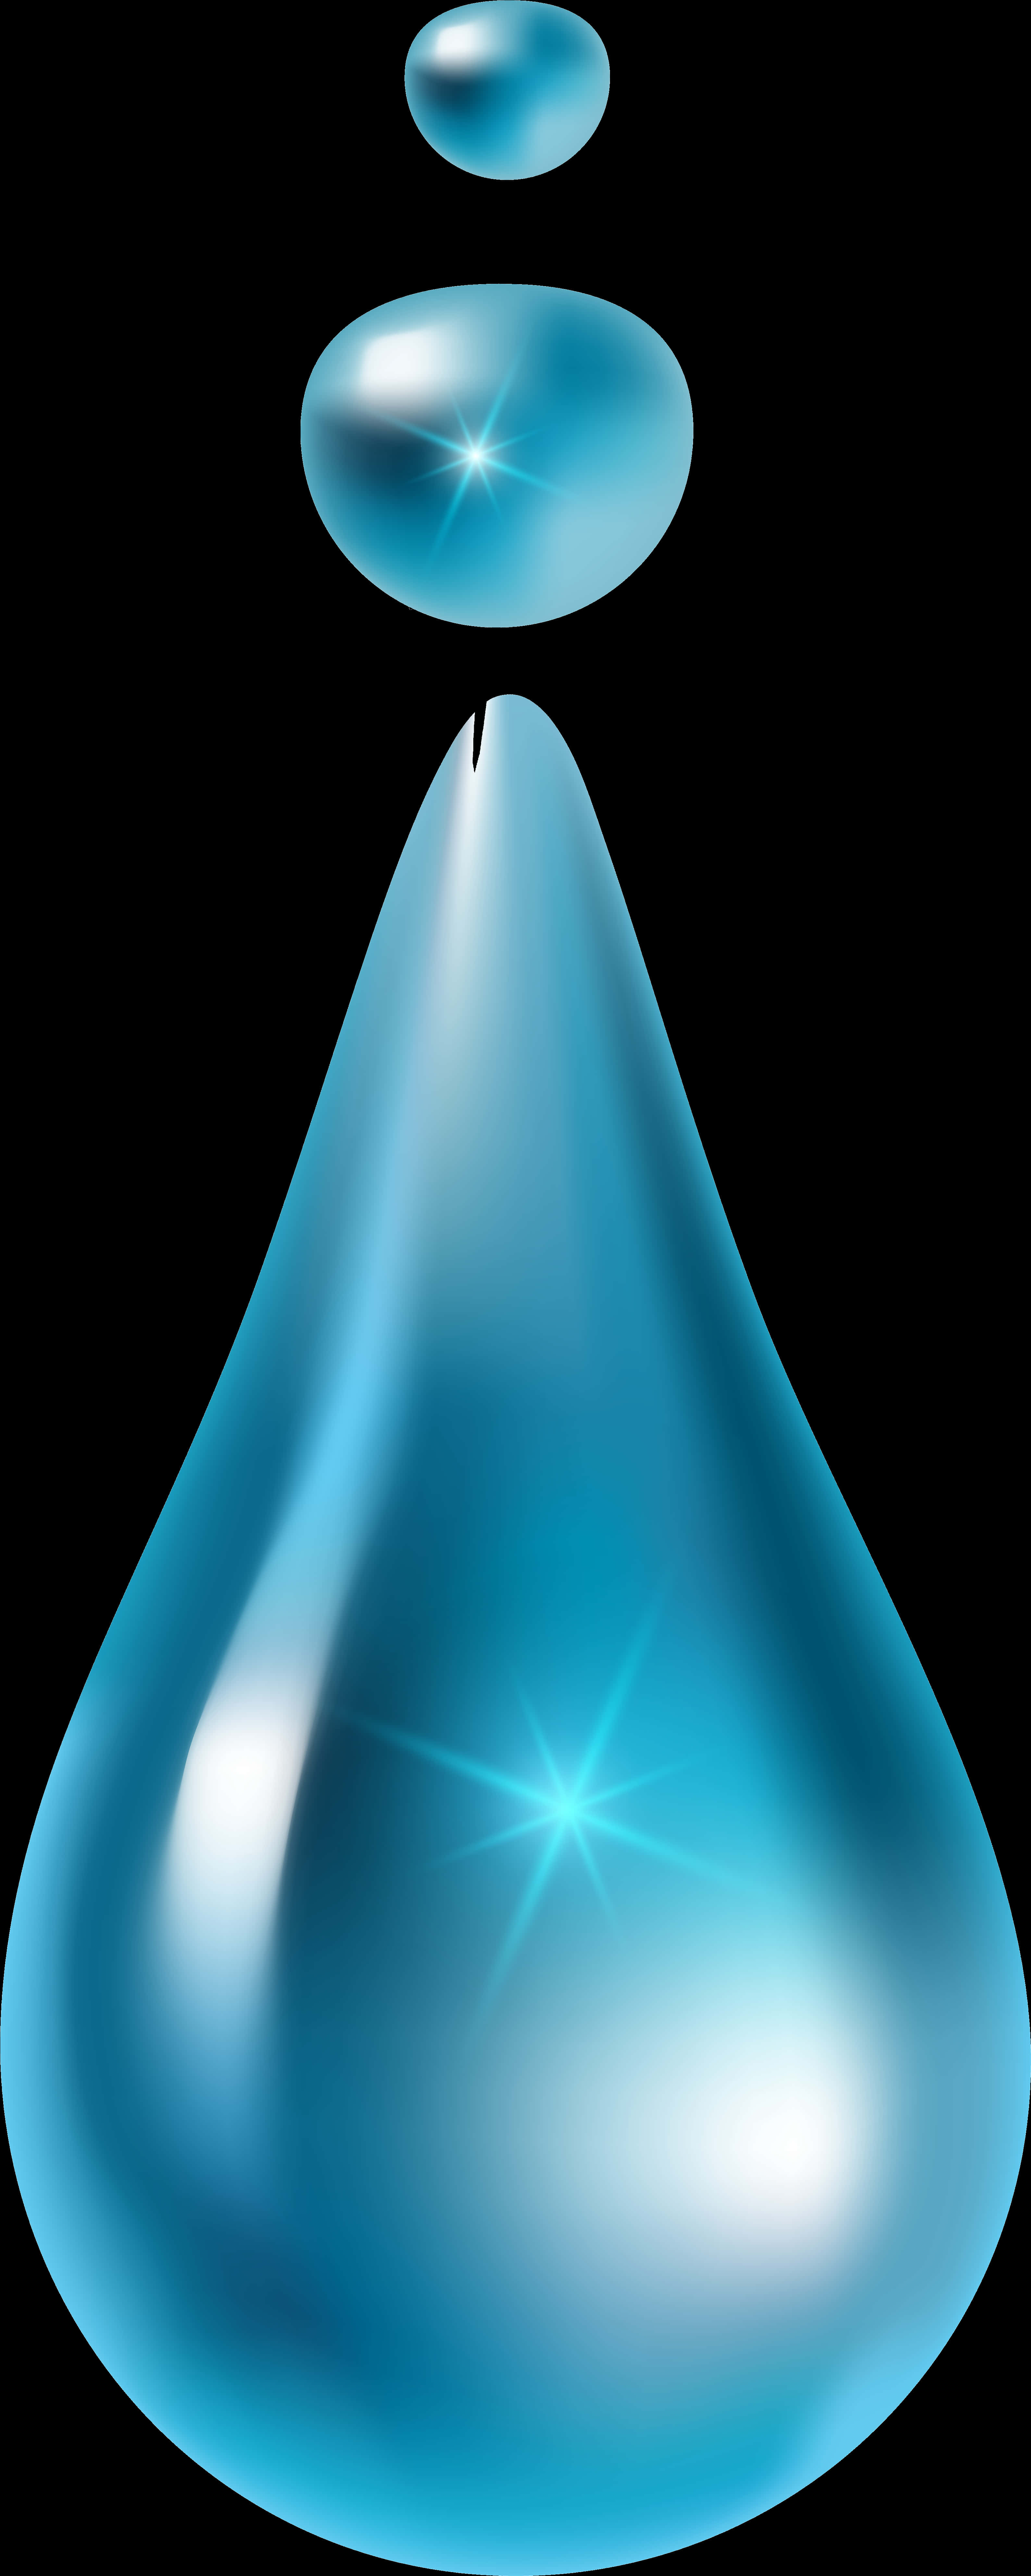 Glistening Water Dropson Black Background PNG